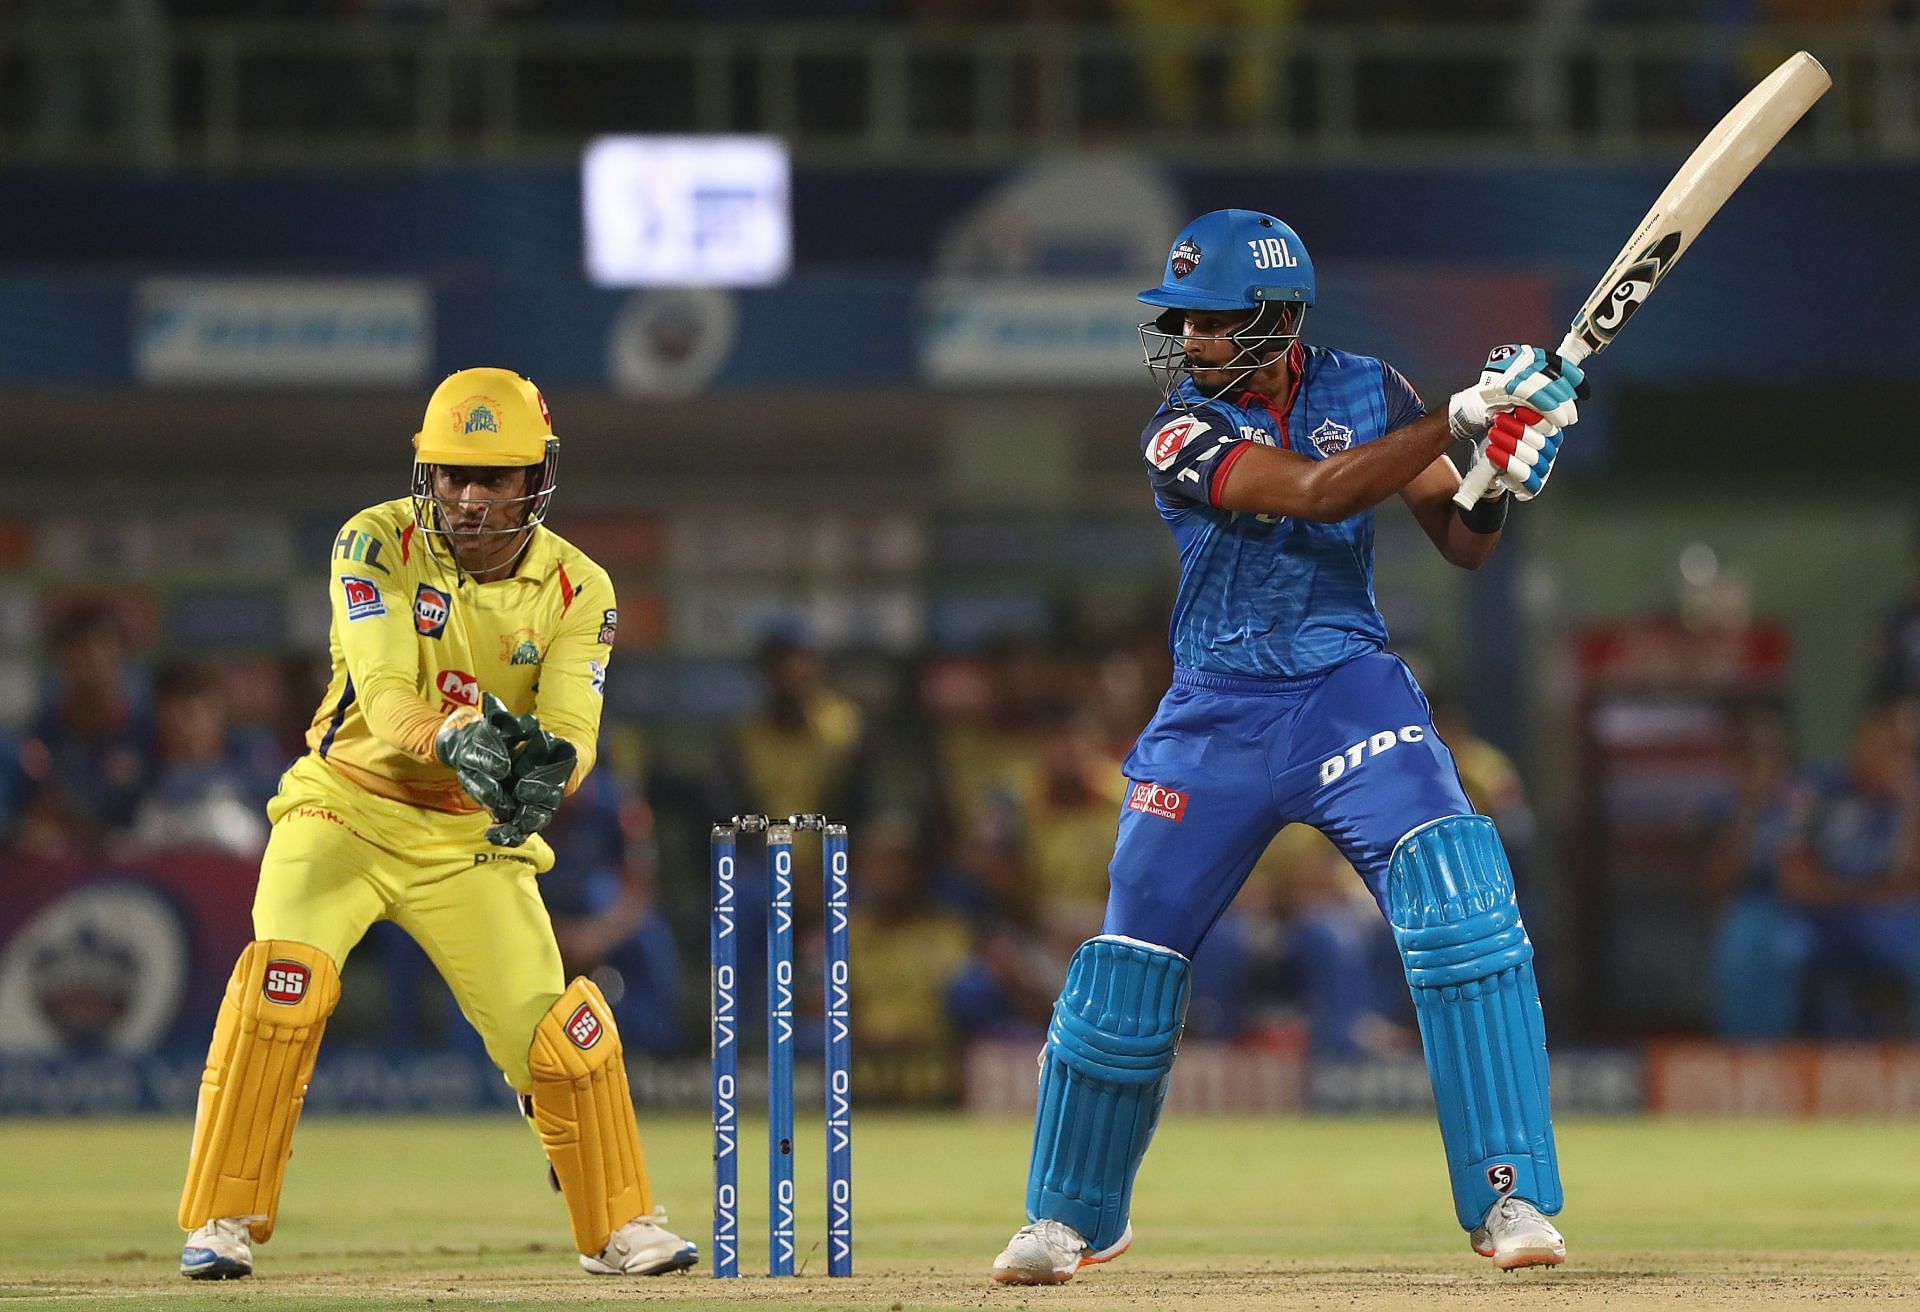 Shreyas Iyer was not retained by Delhi Capitals ahead of IPL Auction 2022